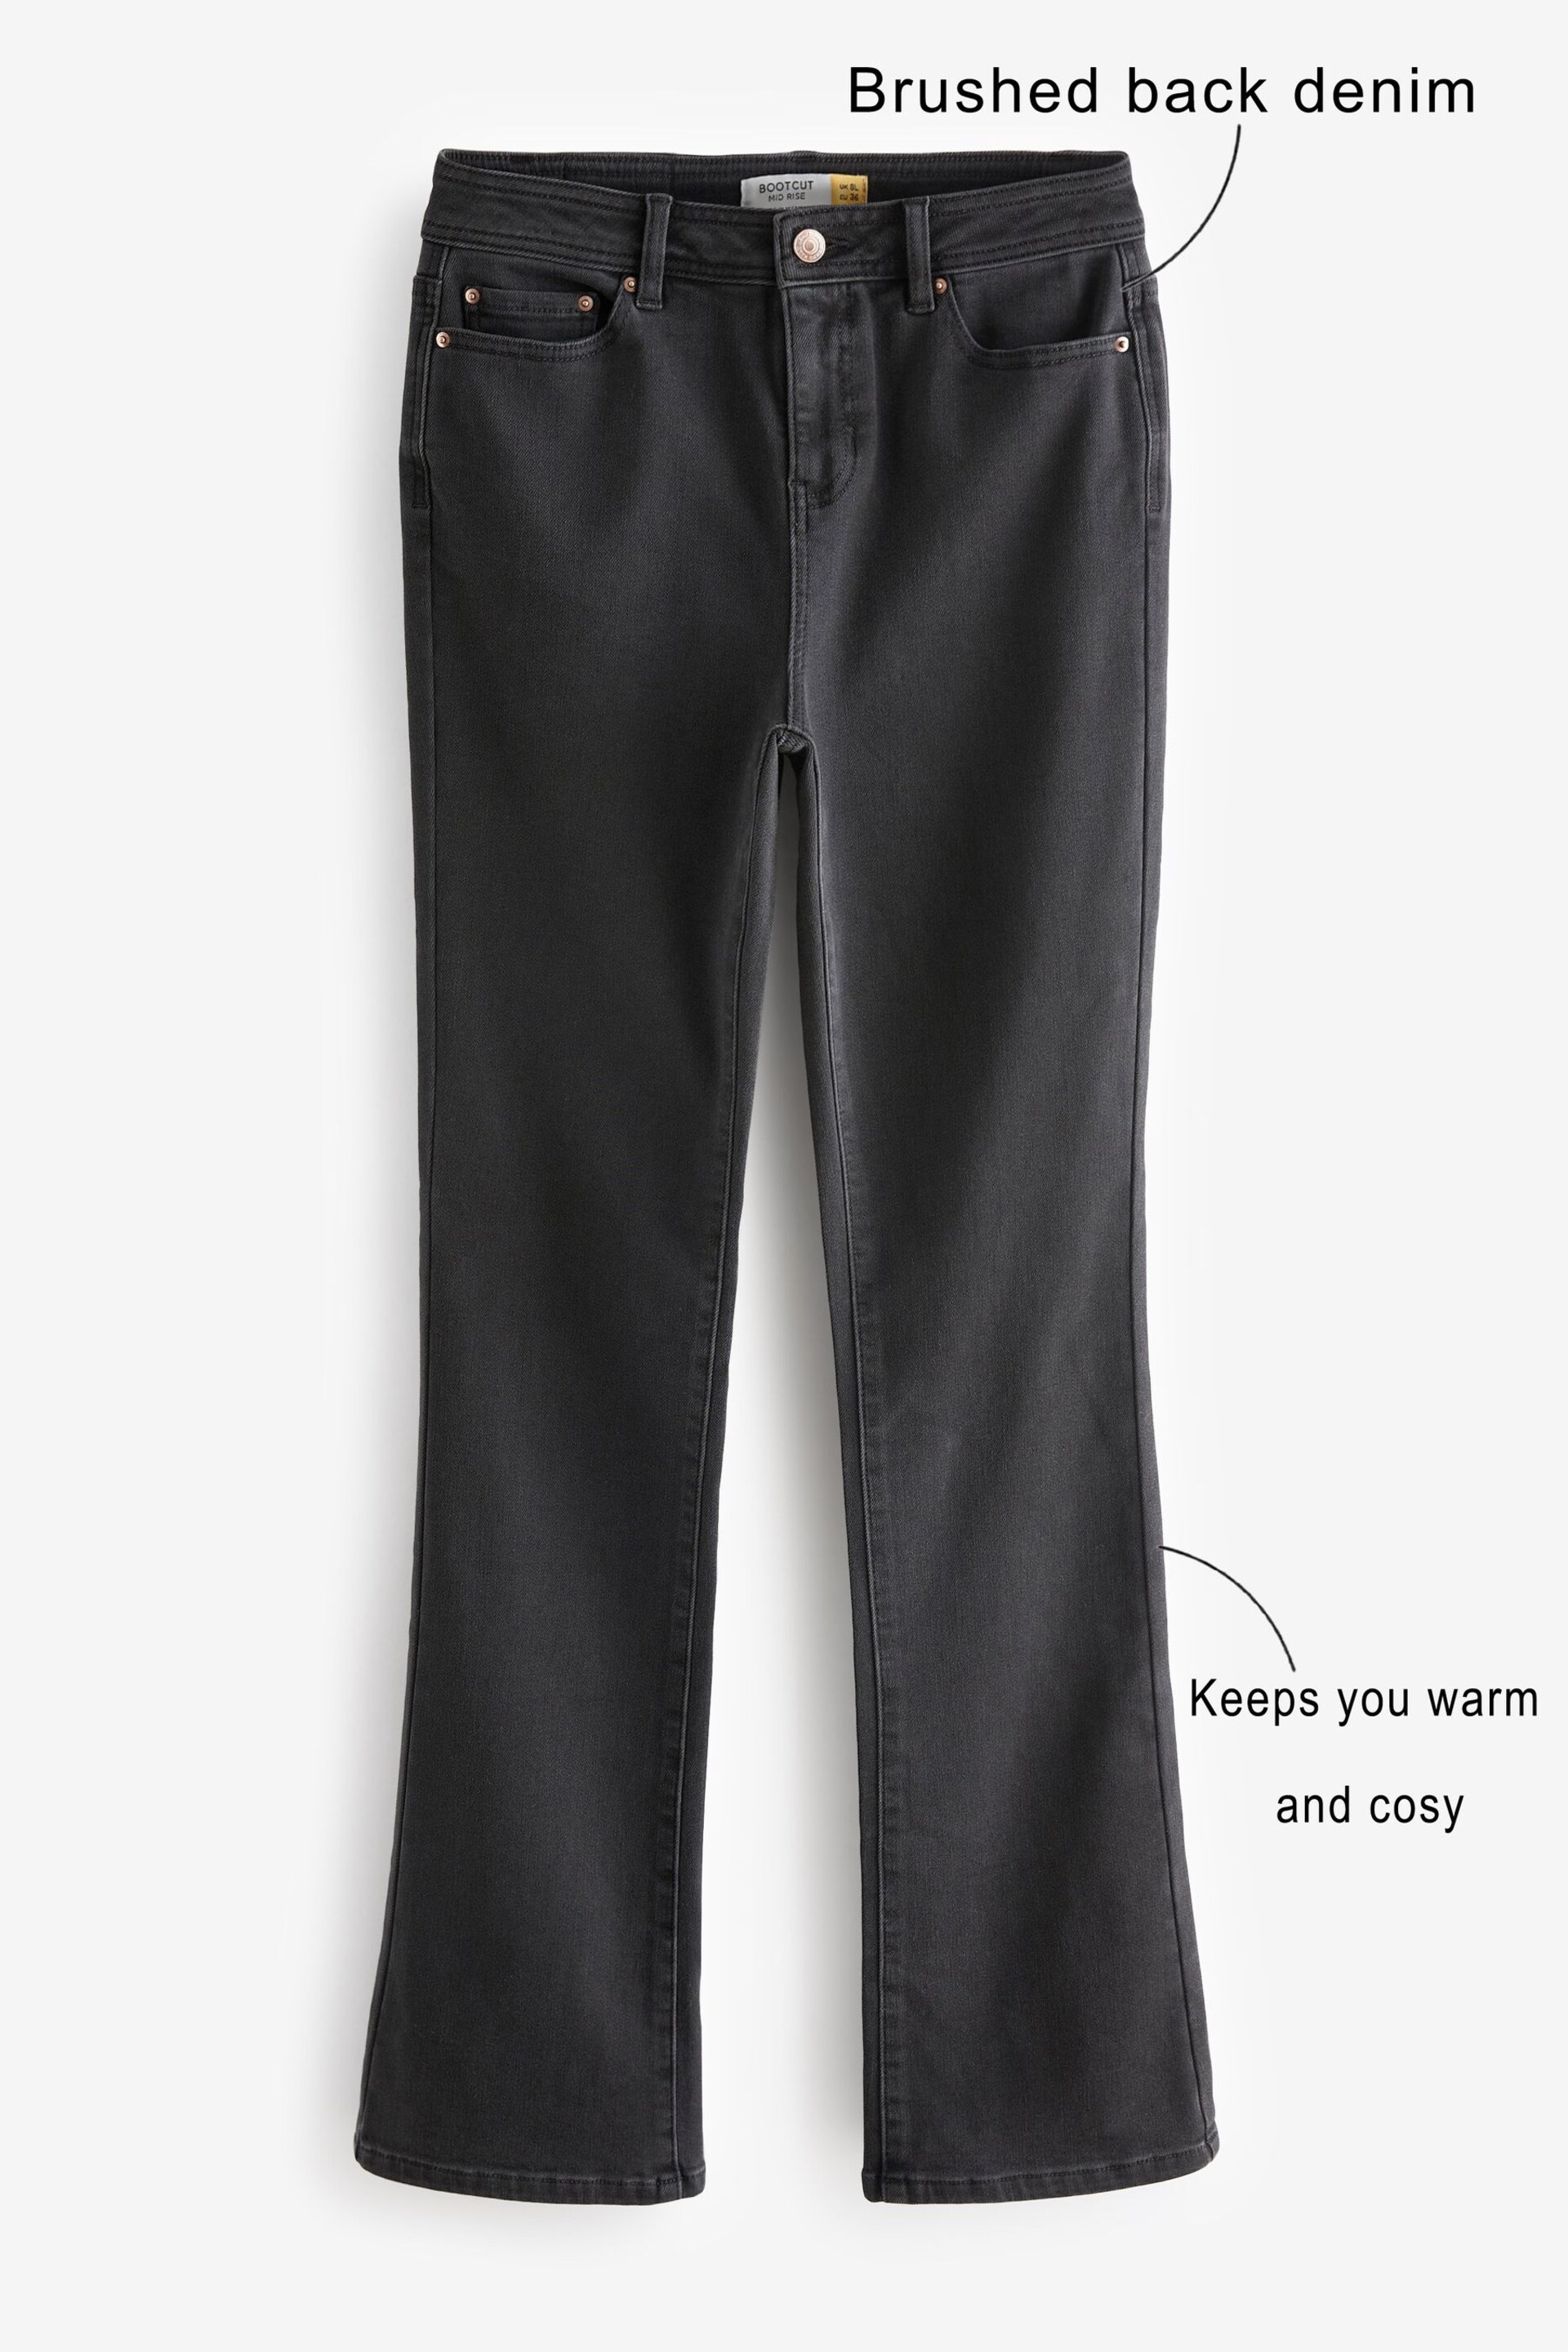 Washed Black Cosy Brushed Bootcut Jeans - Image 5 of 10